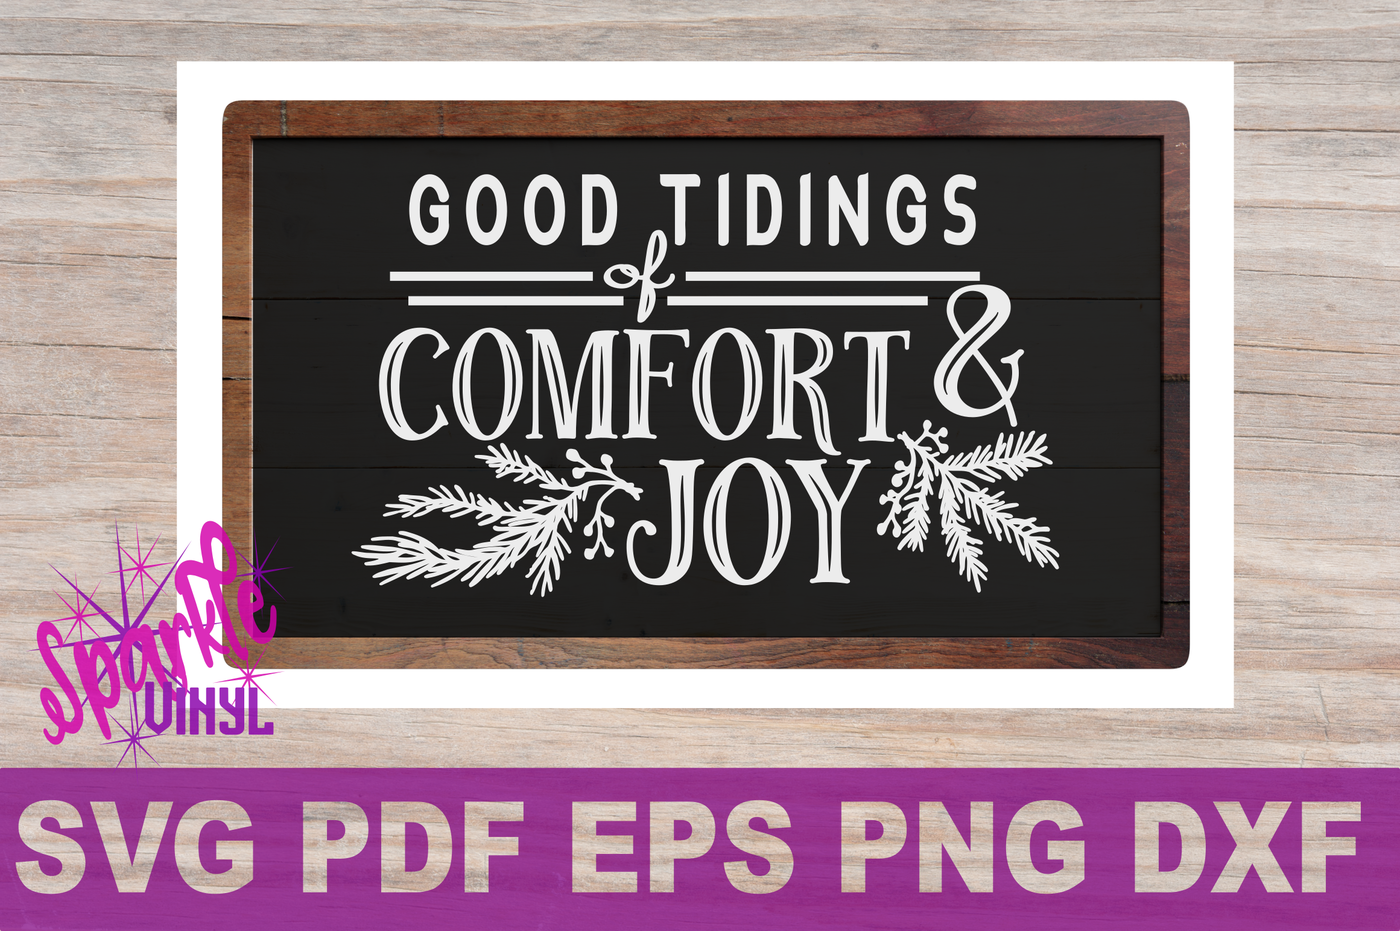 ori 107454 1995fd136f3329d59b3406d80d69cdf2d8650dab svg christmas comfort and joy diy sign stencil farmhouse style printable or svg cutting files for cricut sihouette